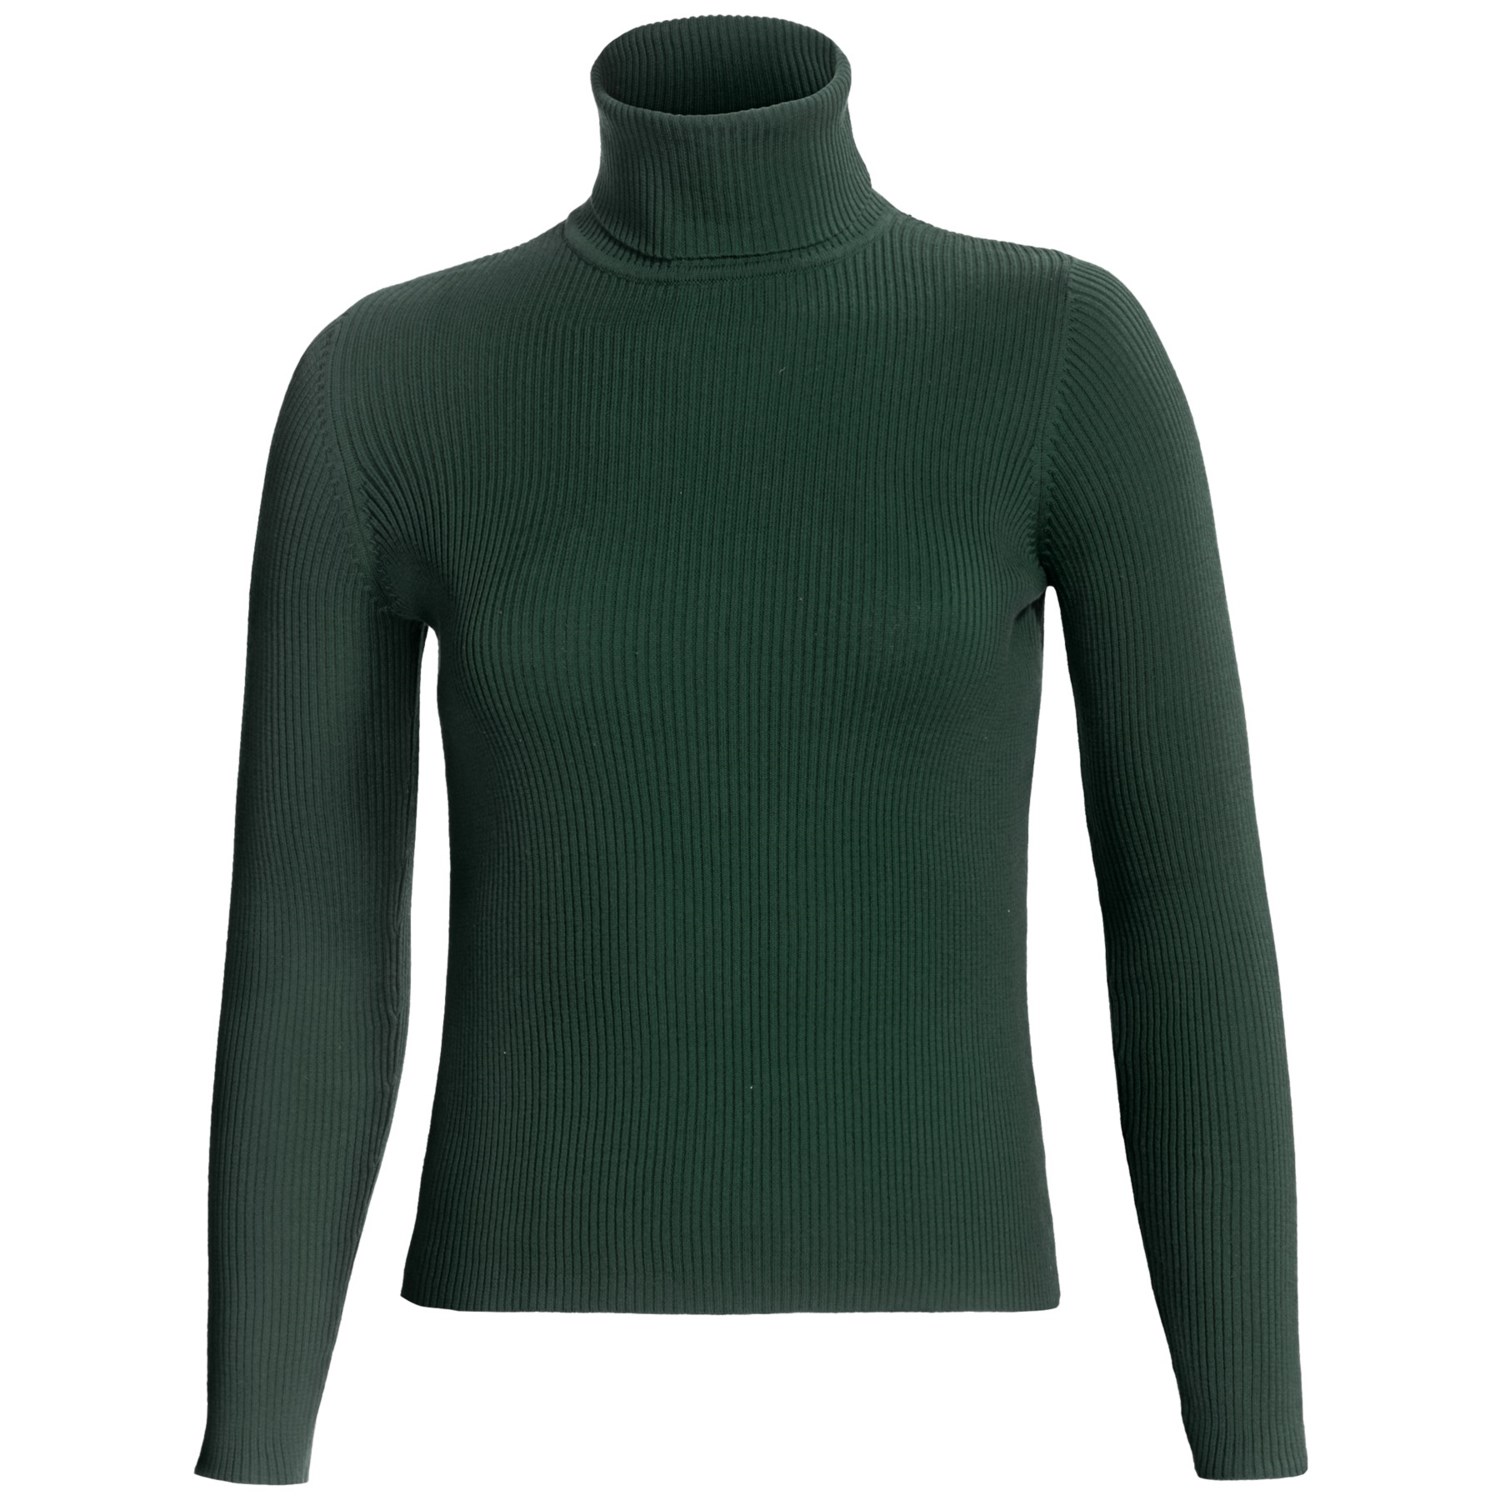 Ribbed Turtleneck Sweater (For Plus Size Women) - Save 62%